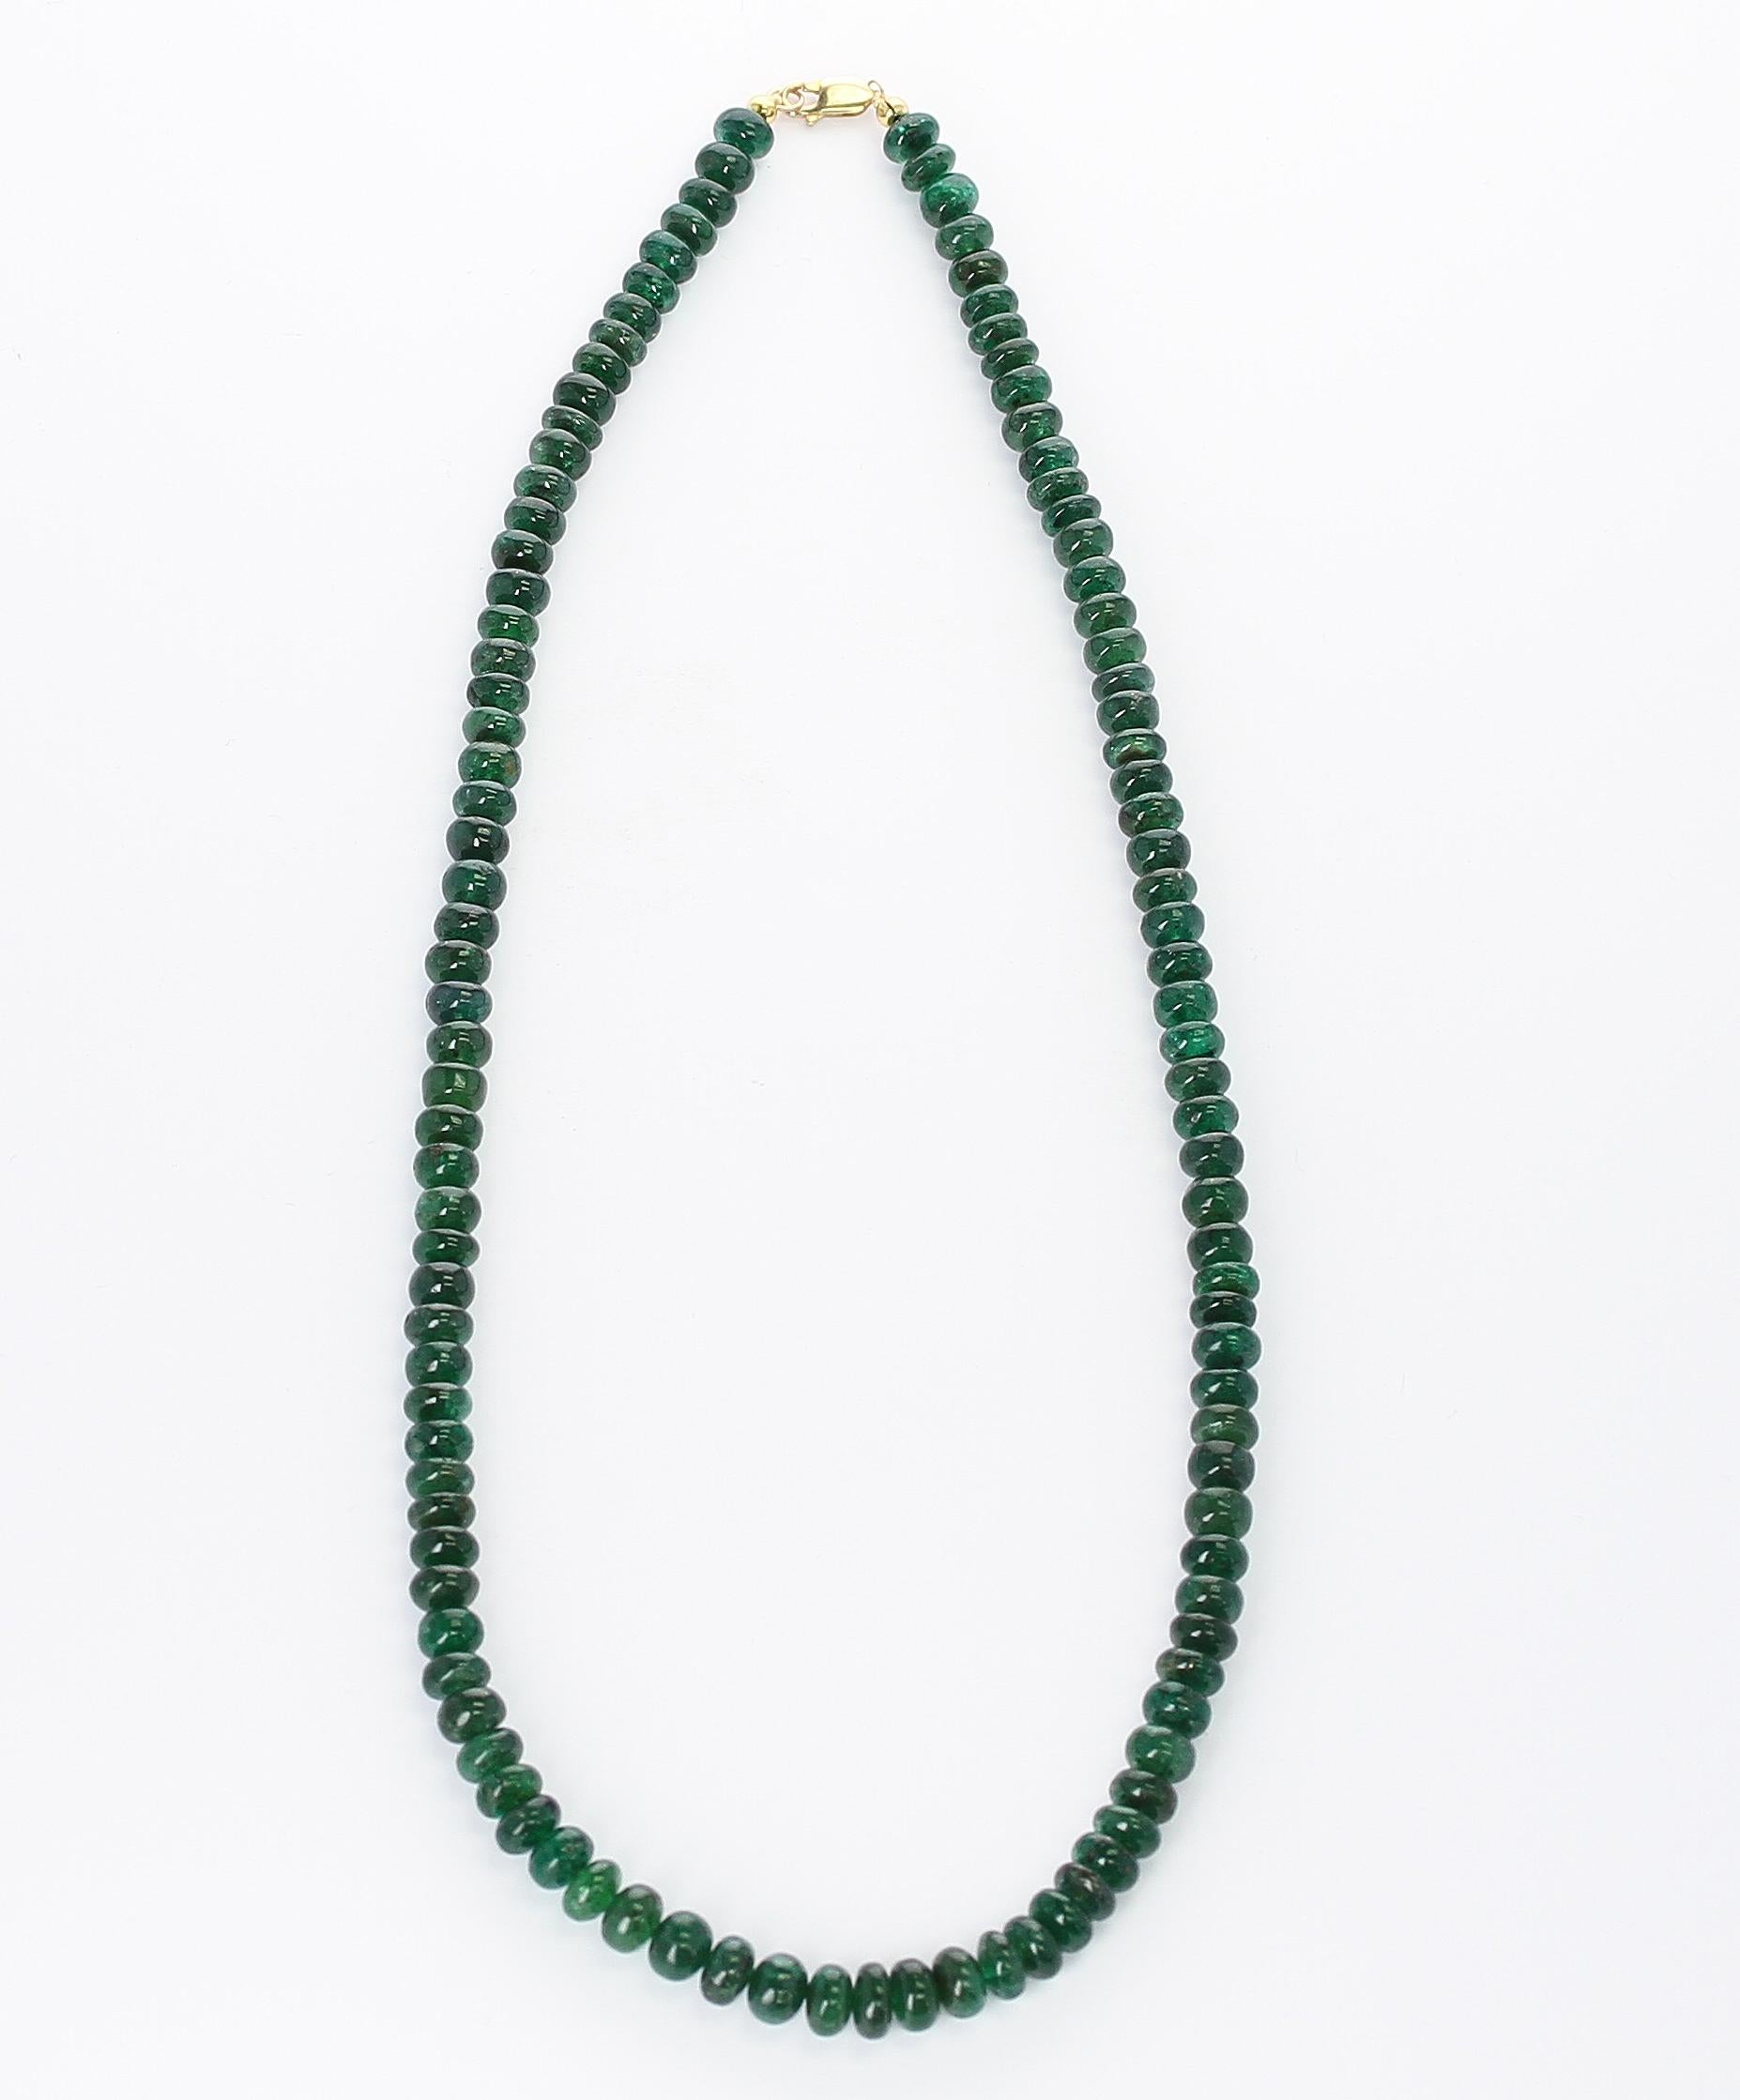 A Genuine & Natural Deep Green Fine Emerald Plain & Smooth Beads Necklace ranging from 7MM to 8.50MM. The length is 21 inches, the clasp is14K Yellow Gold, and the weight is 232 carats. We can also customize the necklace according to your